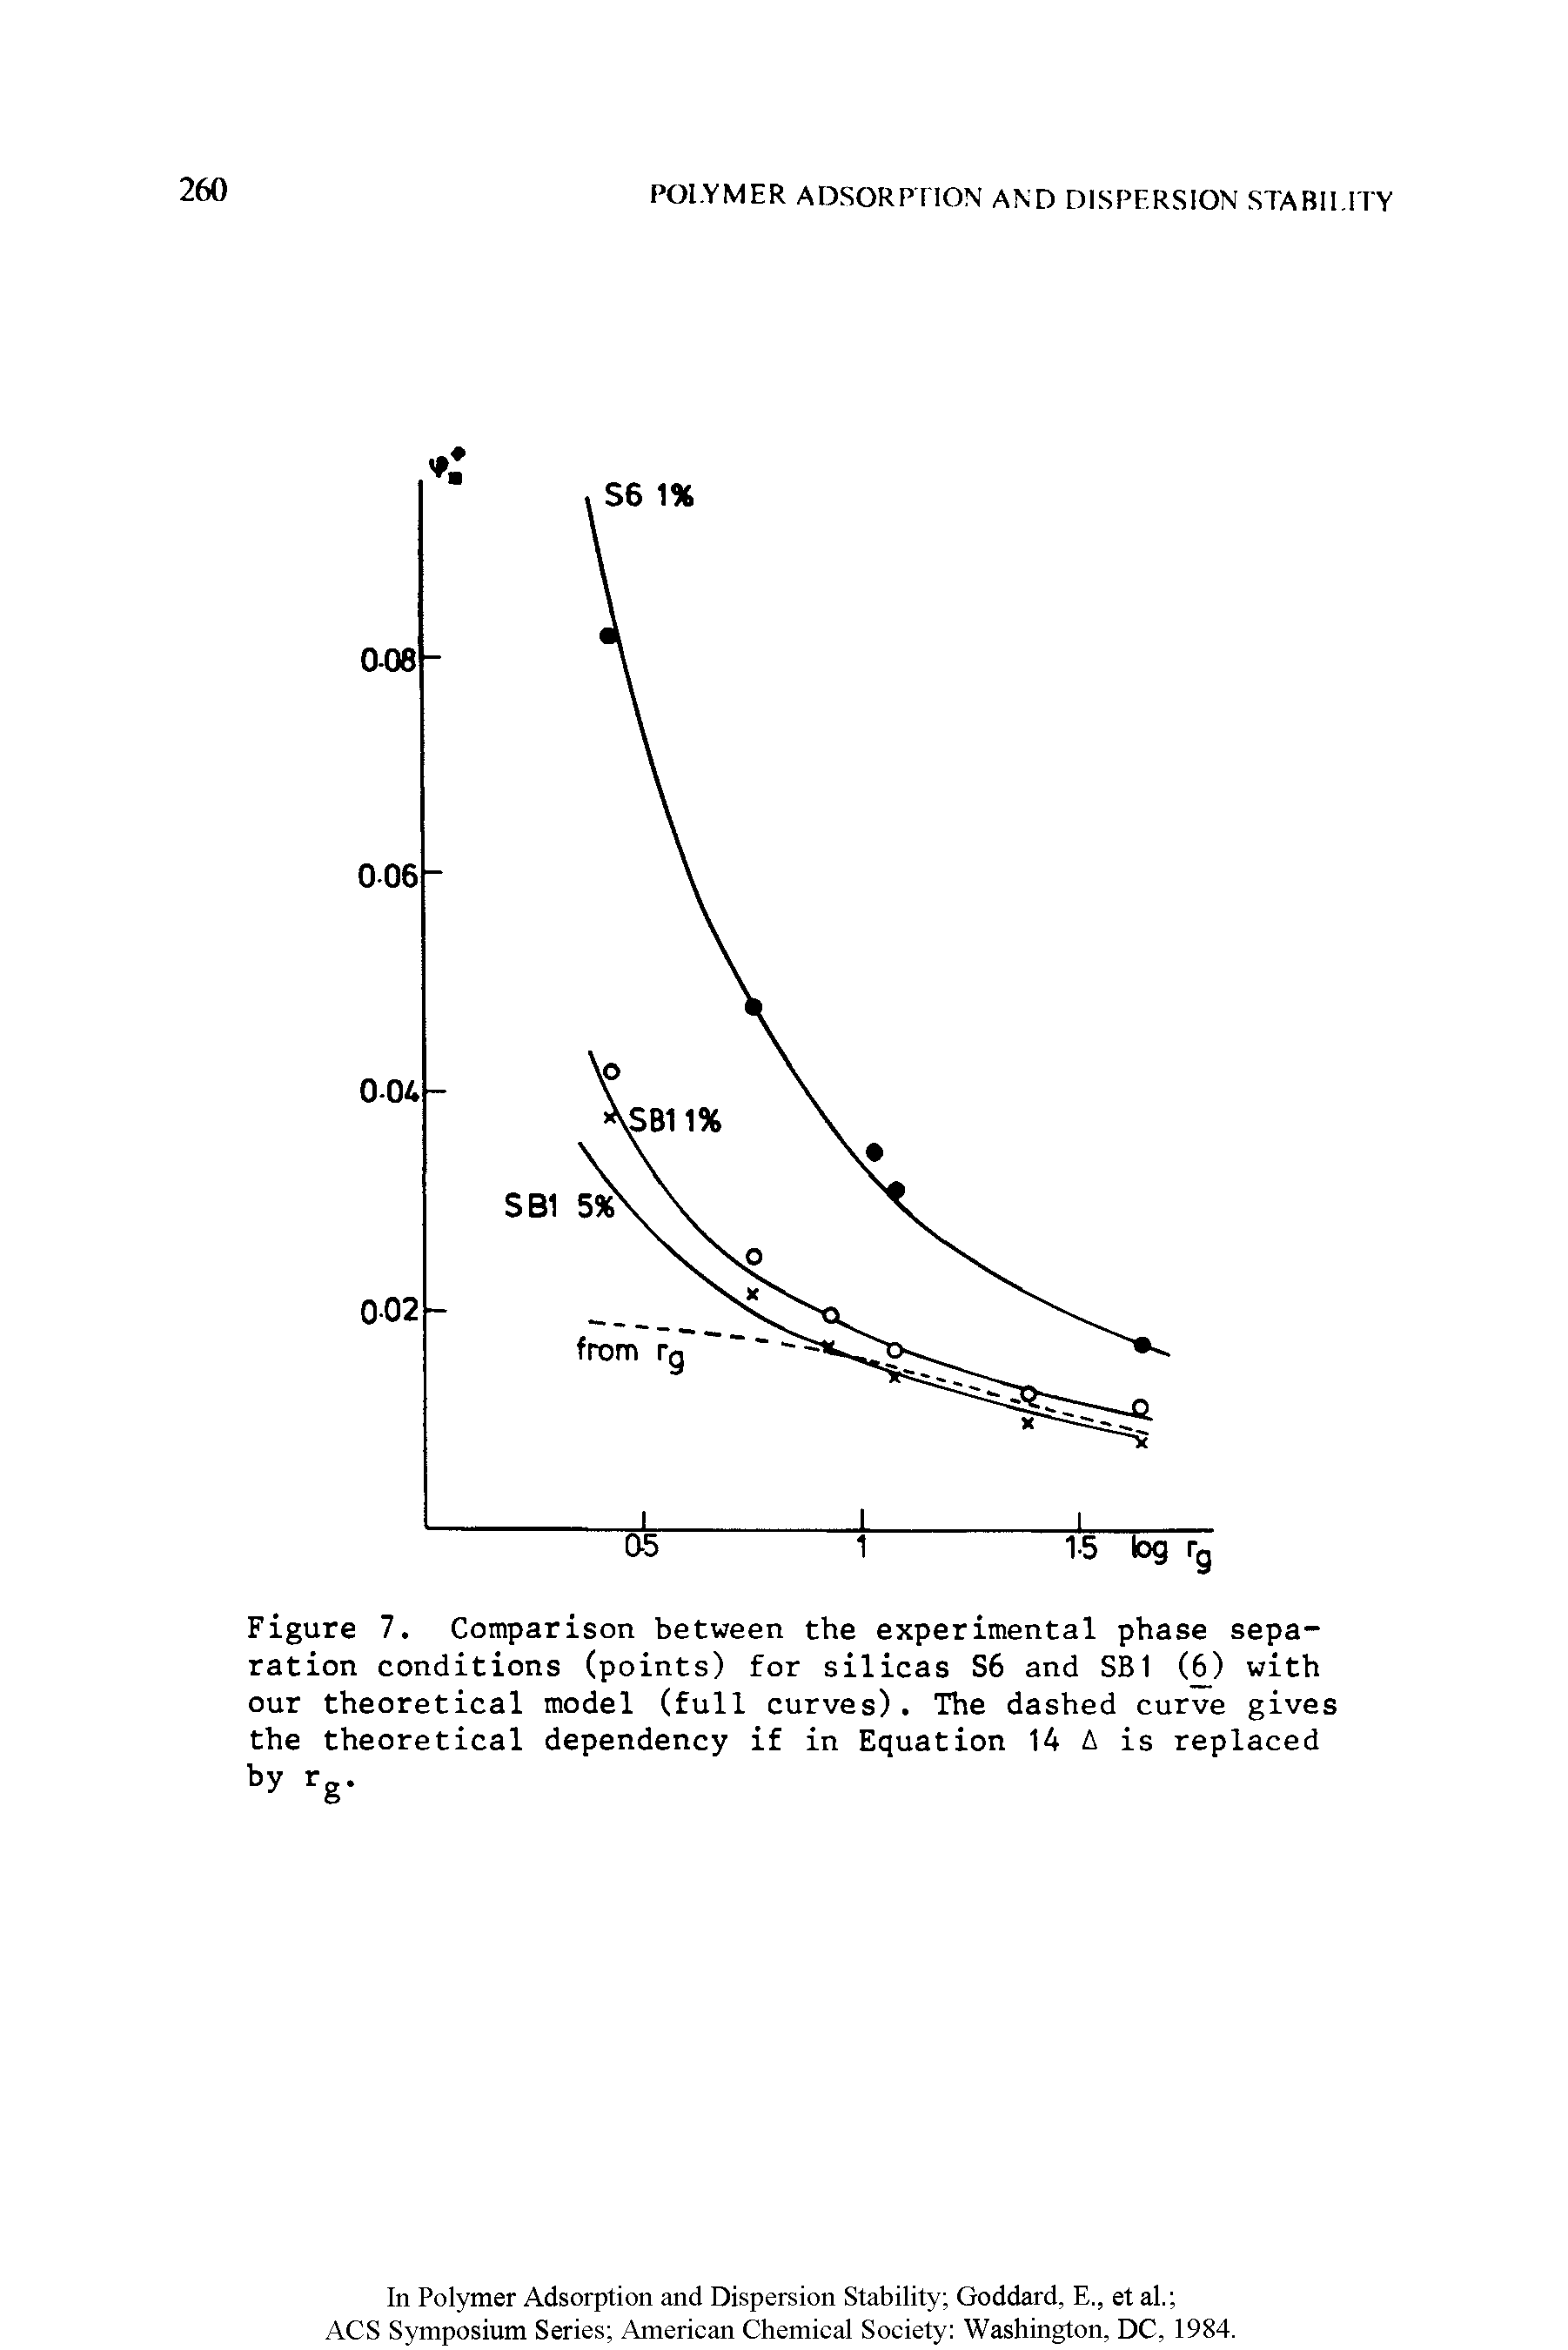 Figure 7. Comparison between the experimental phase separation conditions (points) for silicas S6 and SB1 (6) with our theoretical model (full curves). The dashed curve gives the theoretical dependency if in Equation 14 A is replaced by rg.